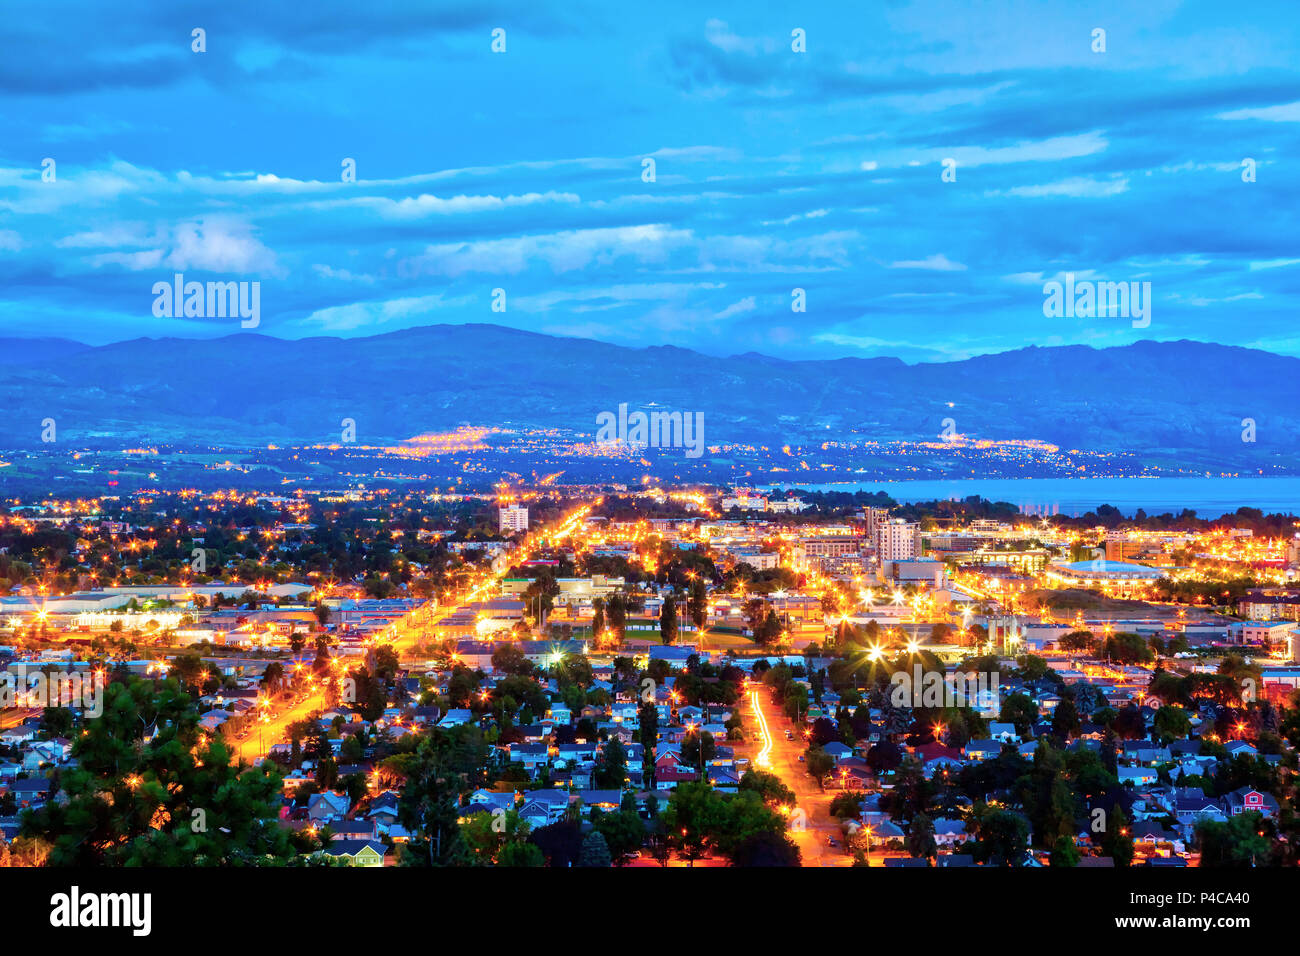 Aerial View of Kelowna, British Columbia, just after sunset on Knox Mountain, Canada, showing downtown and residential districts with bright night lig Stock Photo